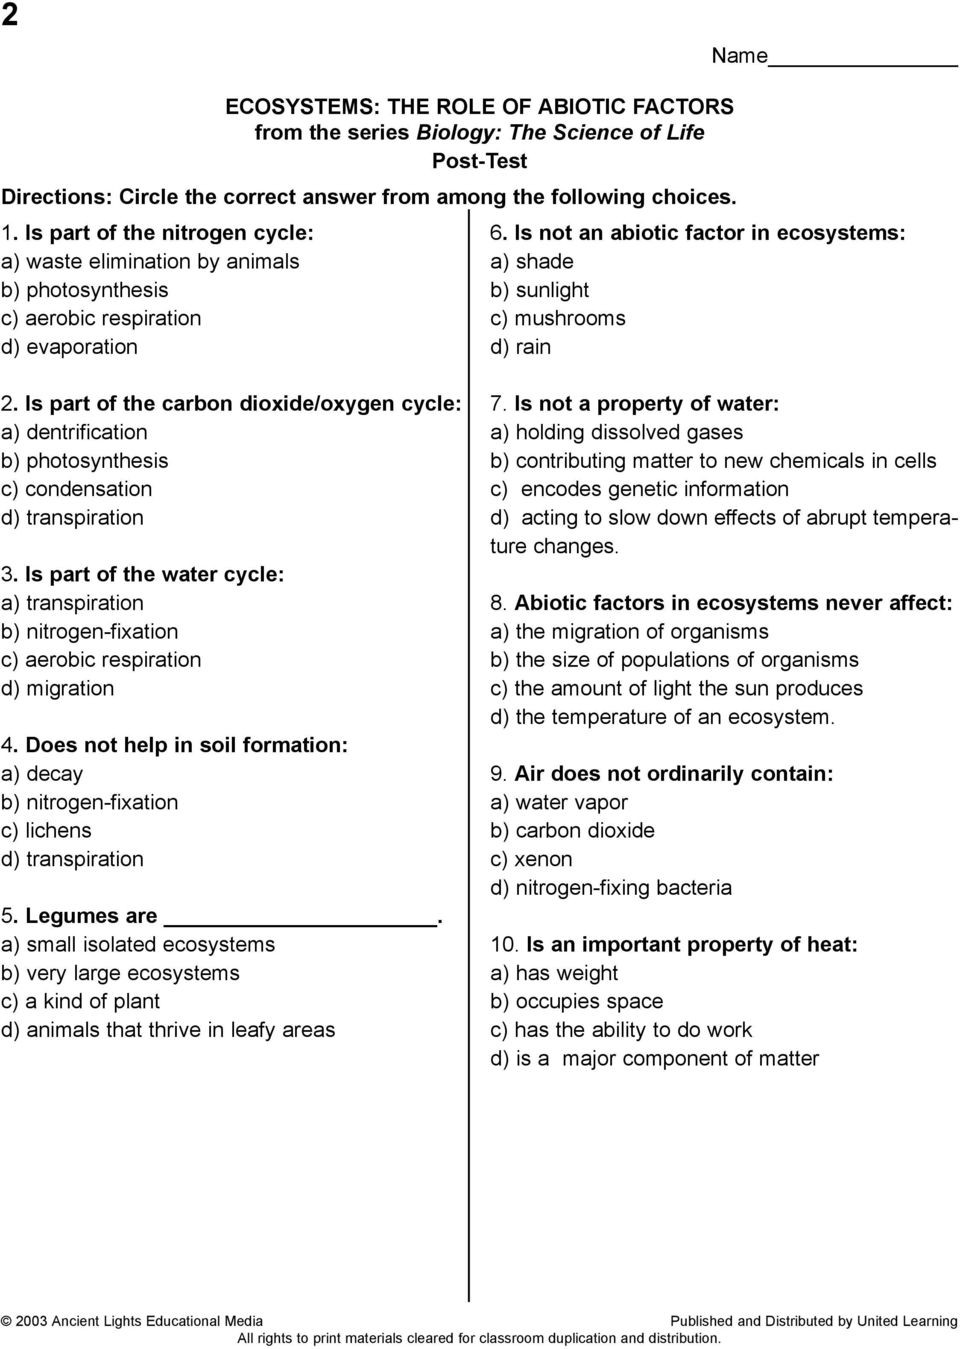 Abiotic Vs Biotic Factors Worksheet Answers Ecosystems the Role Of Abiotic Factors From the Series